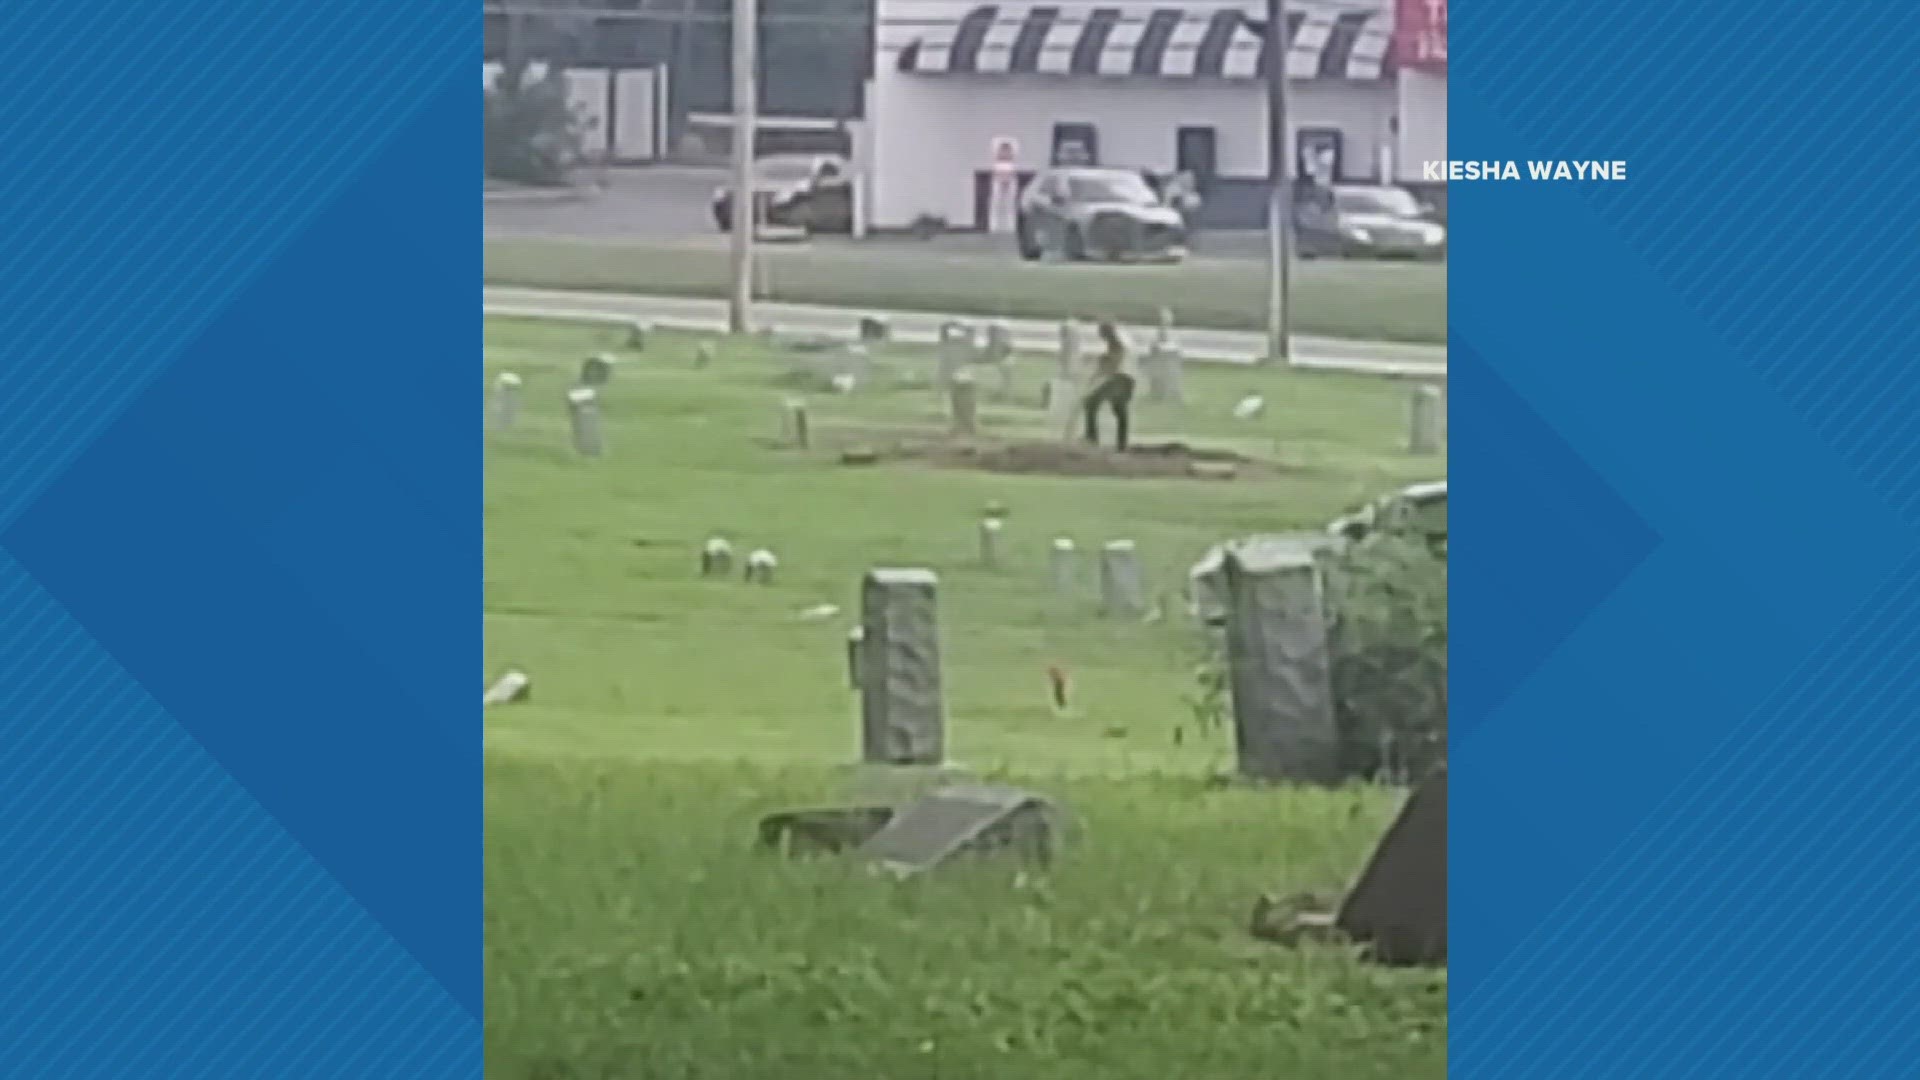 Two men were caught on cellphone video apparently digging up a grave. The incident happened in Washington Park cemetery in north St. Louis County.